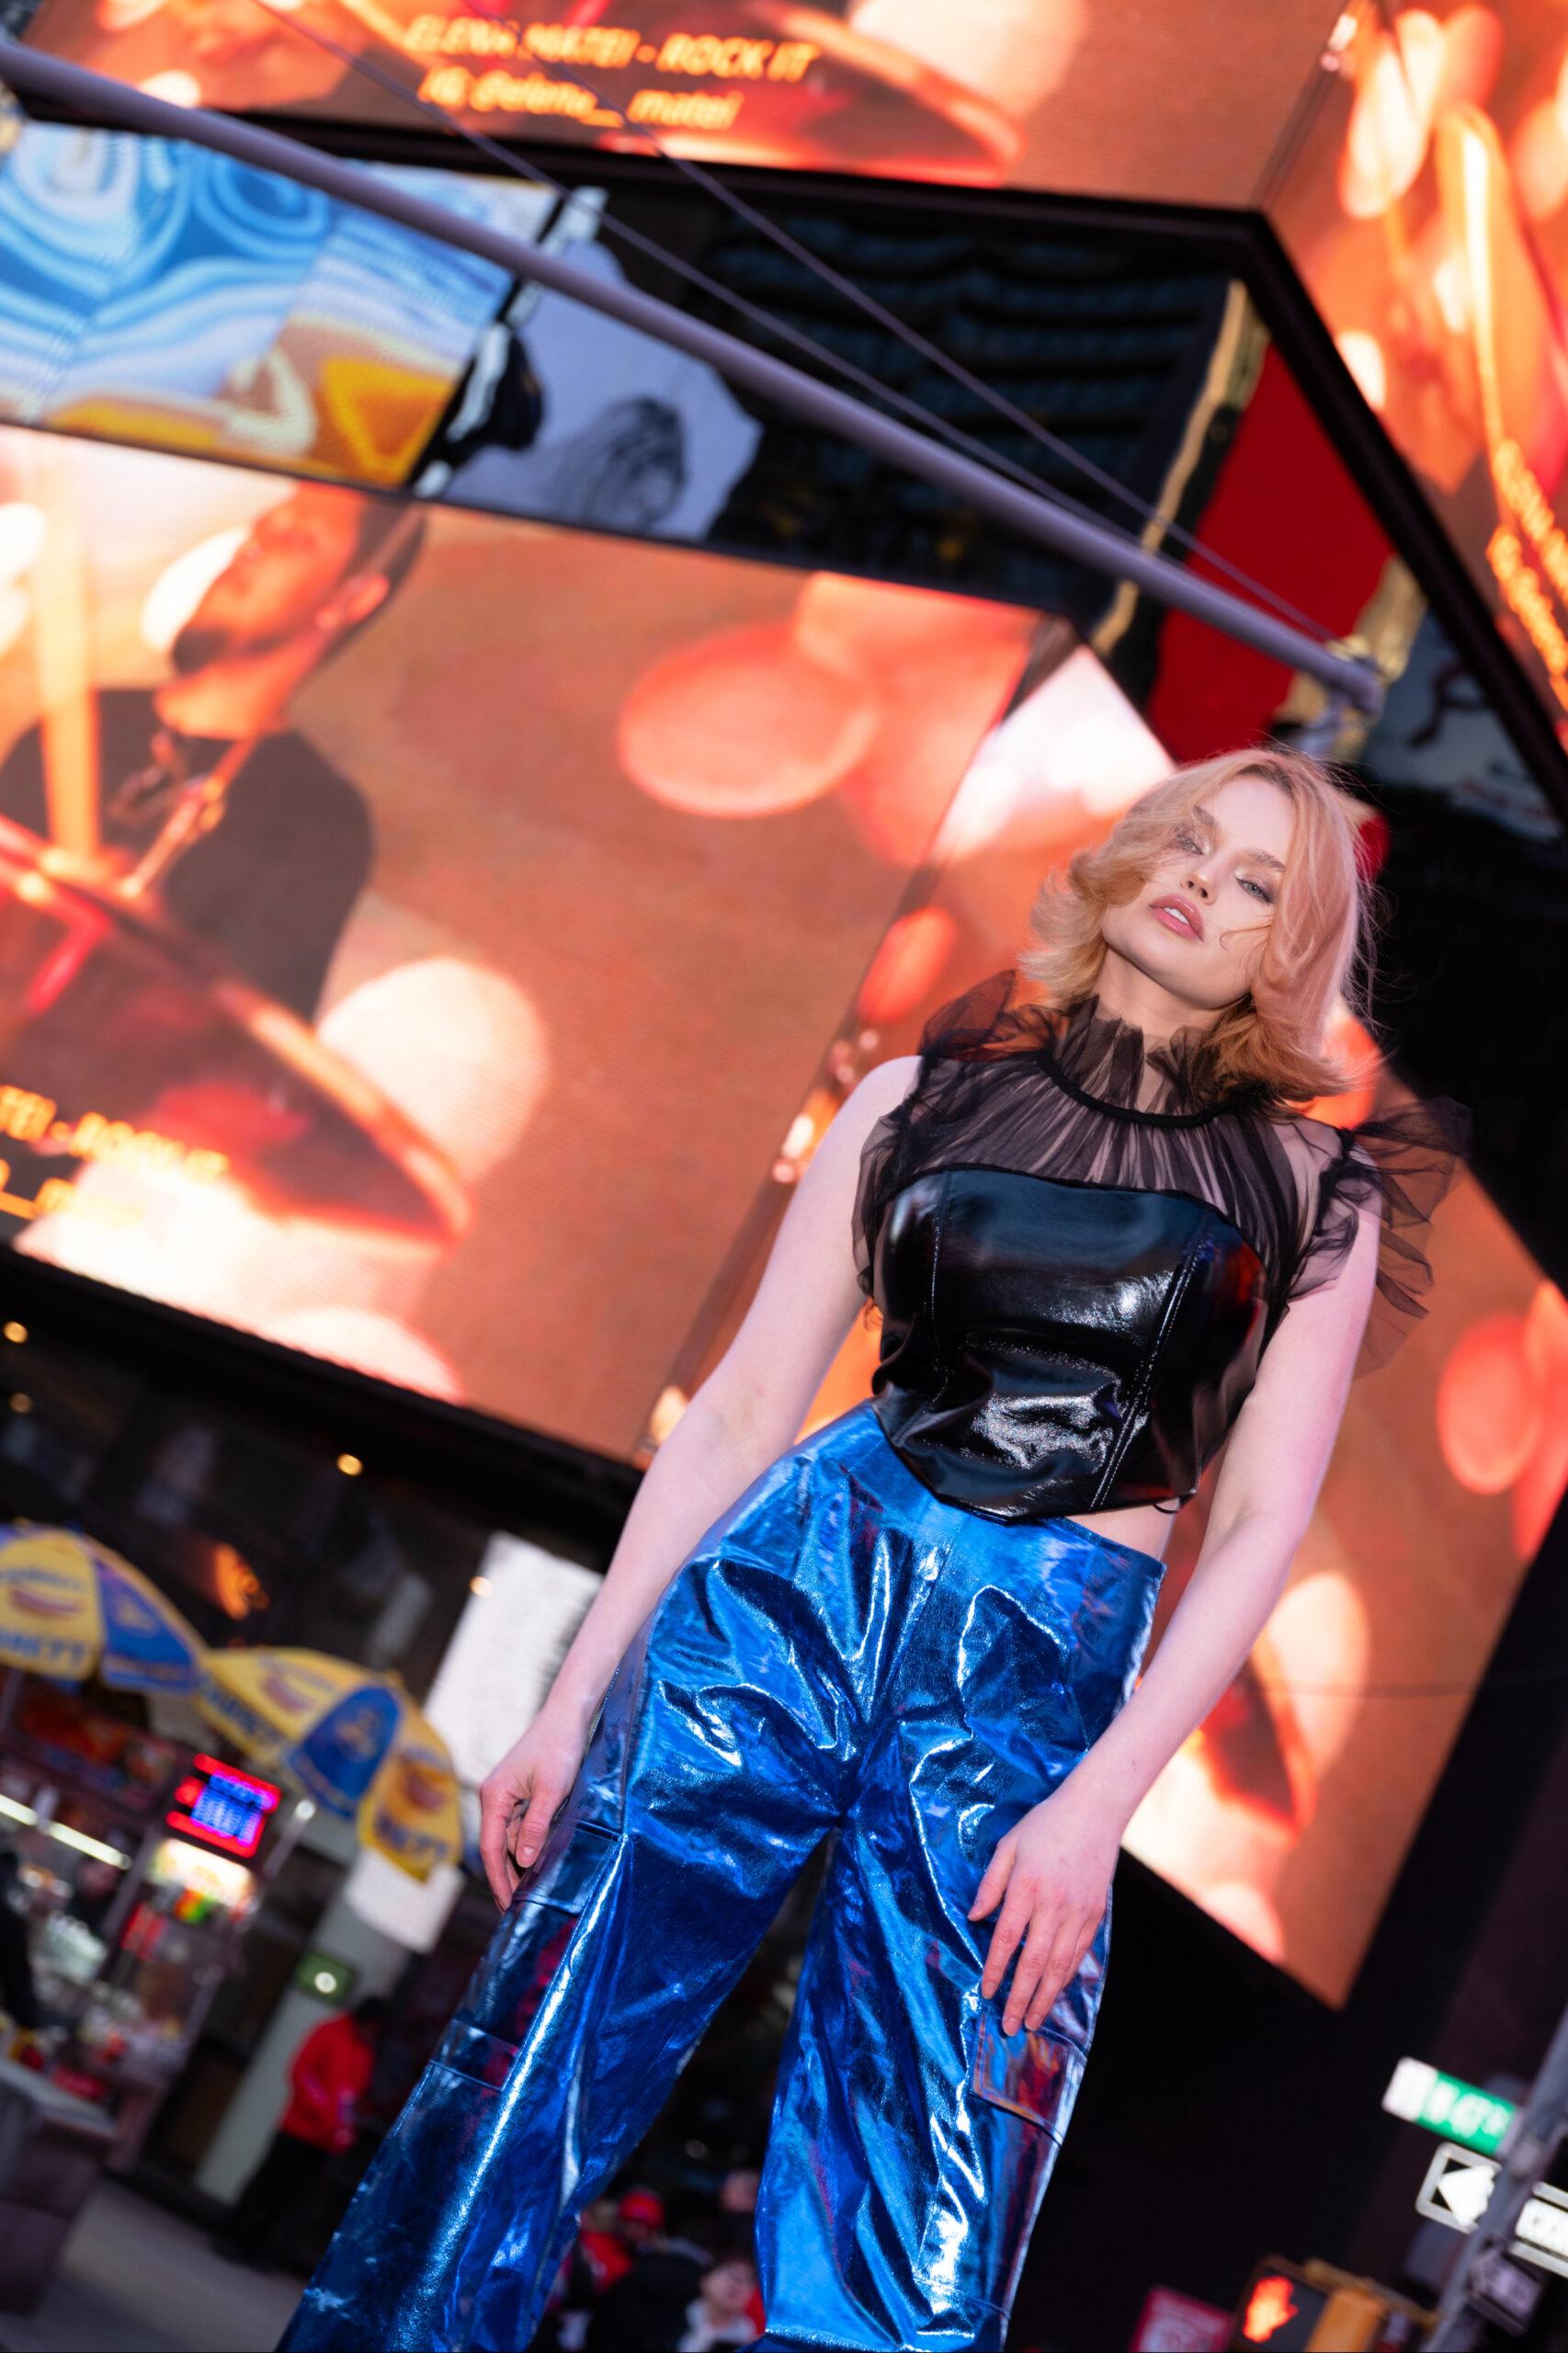 International Star Elena Matei Takes Over NY's Times Square For 'Rock It' Release [PHOTOS]